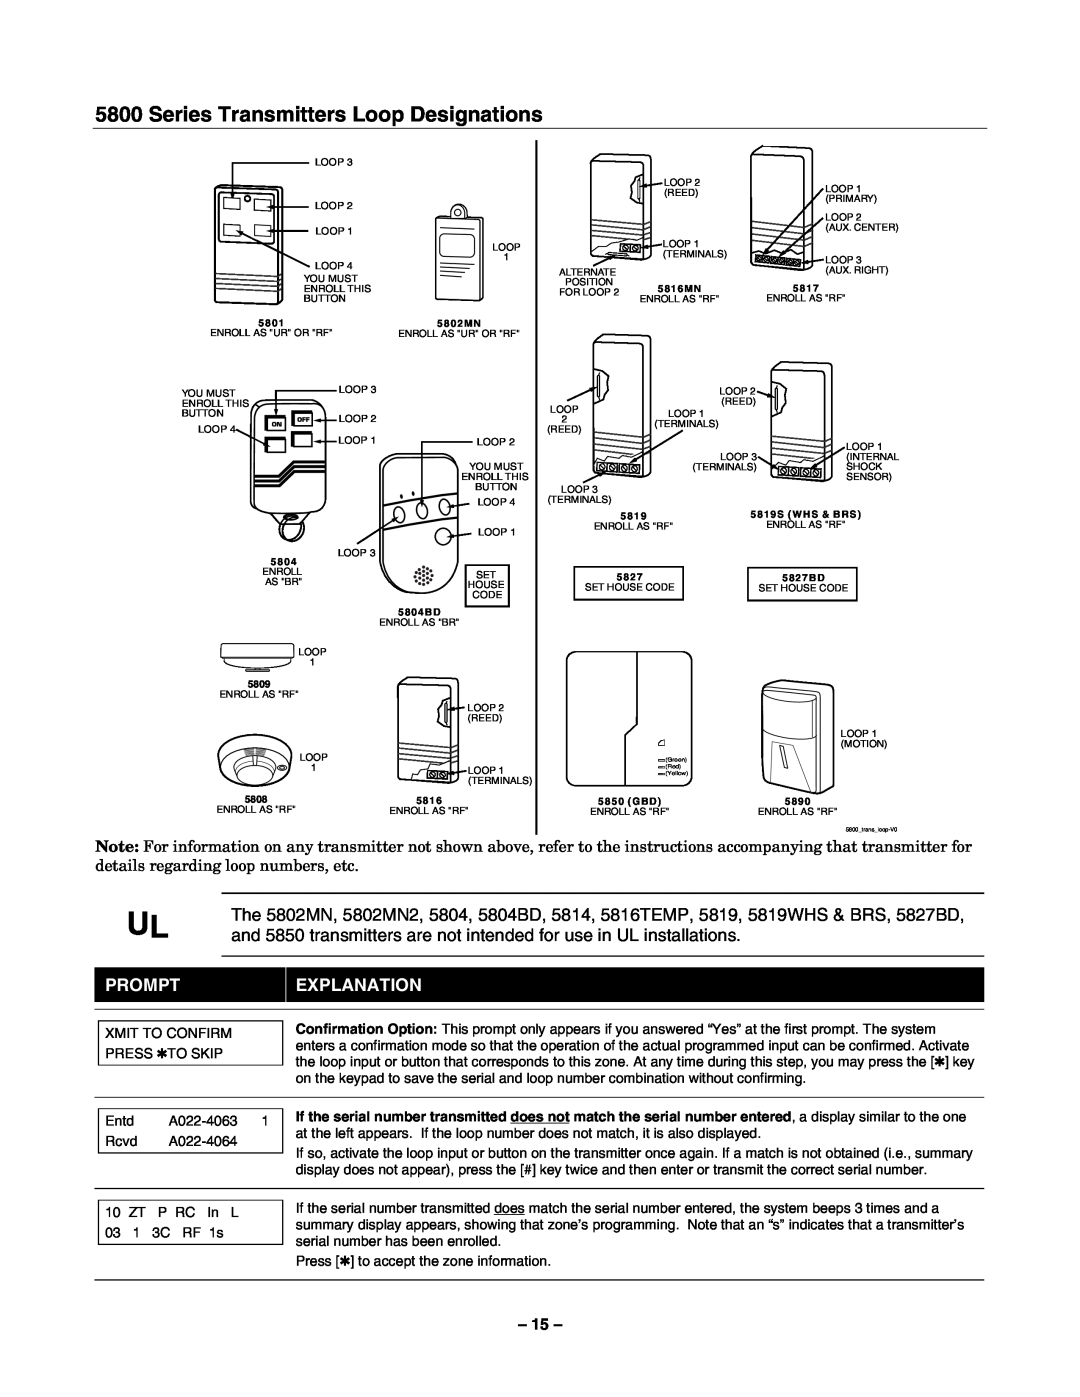 Honeywell Ademco Vista Series Commercial Burglary Partitioned Security System With Scheduling manual Prompt, Explanation 